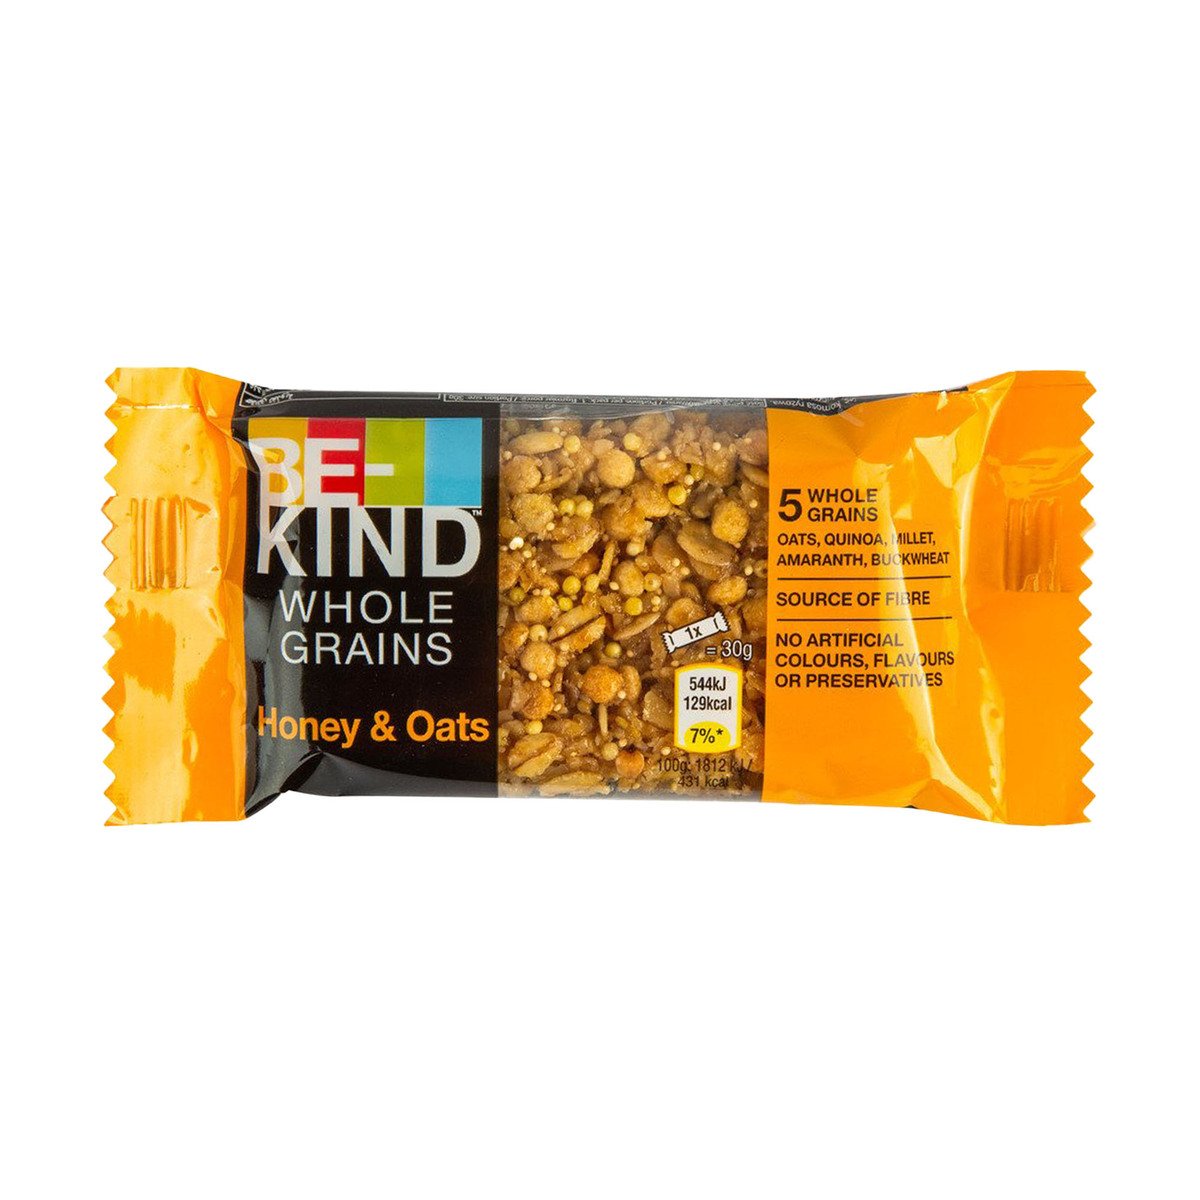 Buy Be-Kind Whole Grains Honey & Oats Bar 30 g Online at Best Price | Cereal Bars | Lulu UAE in Kuwait